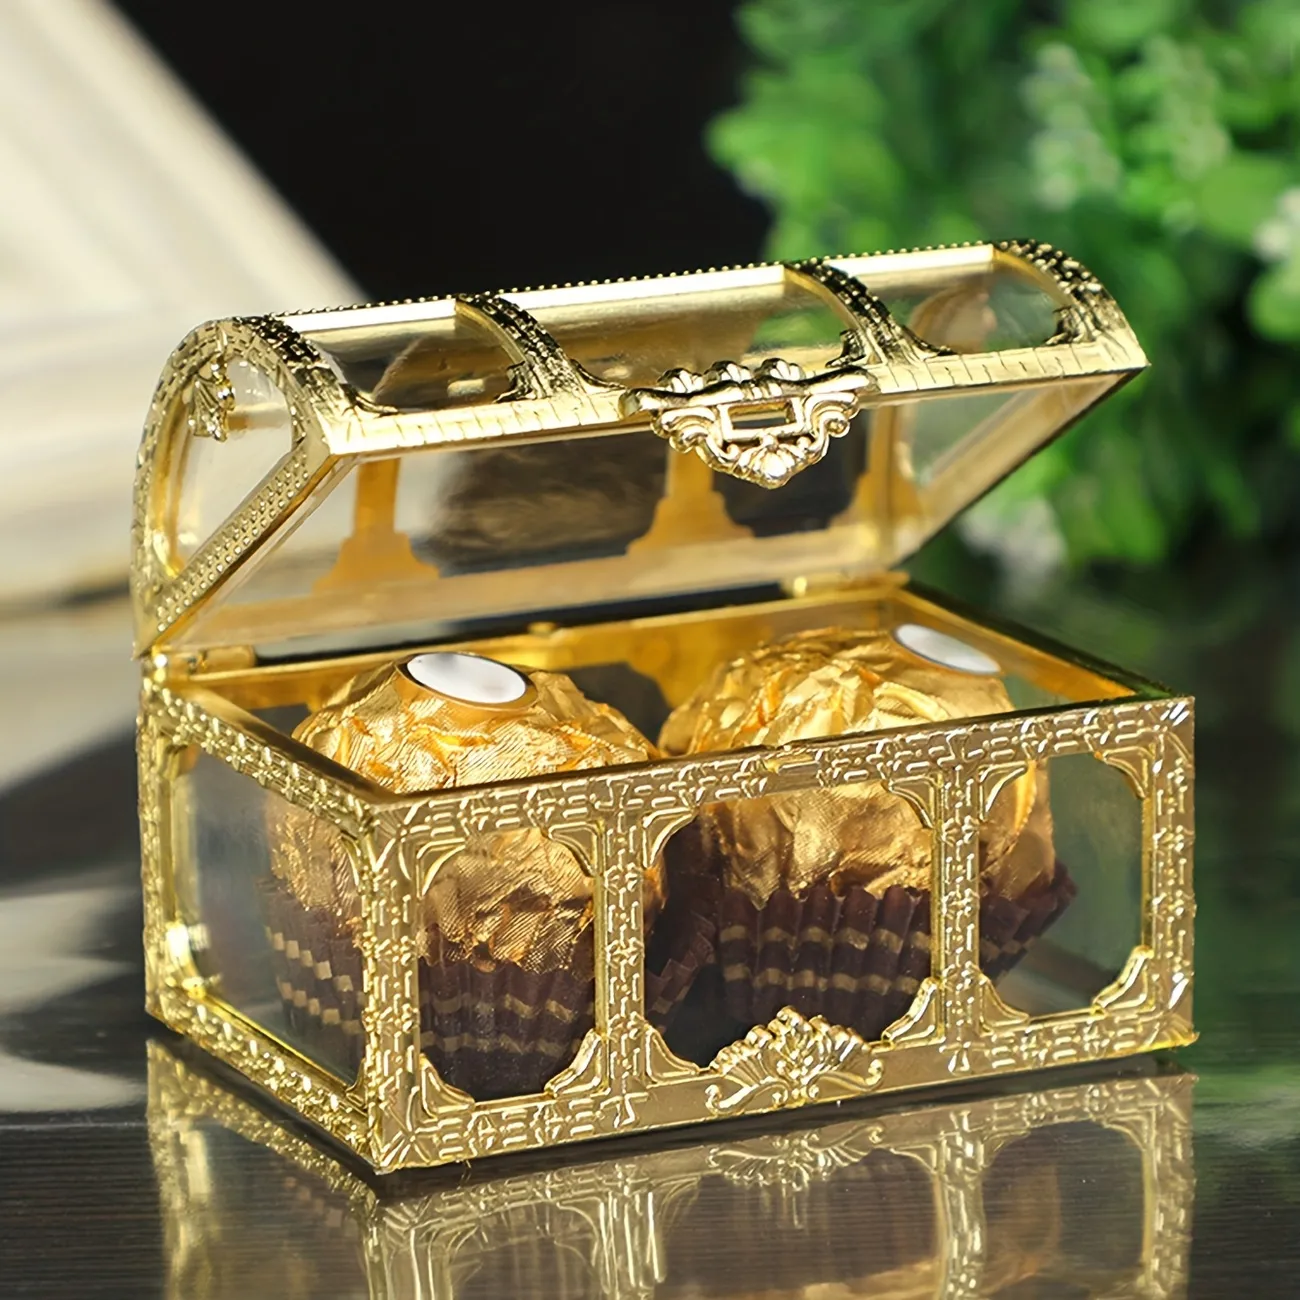 Vintage Golden Treasure Chest Jewelry Box - Perfect For Weddings